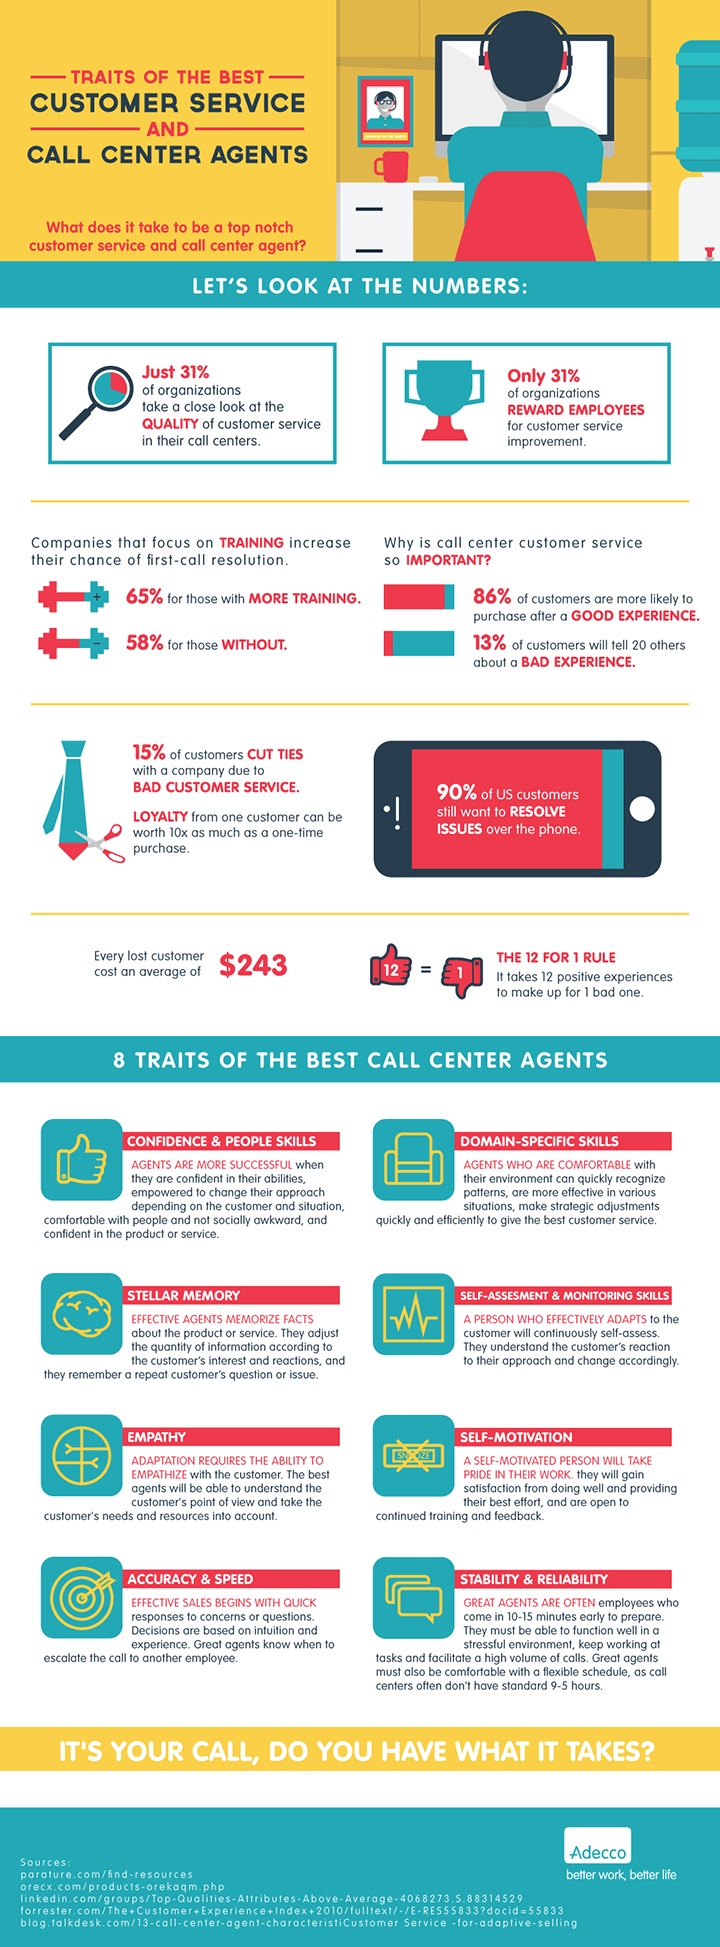 Information on what to look for when hiring call center agents.